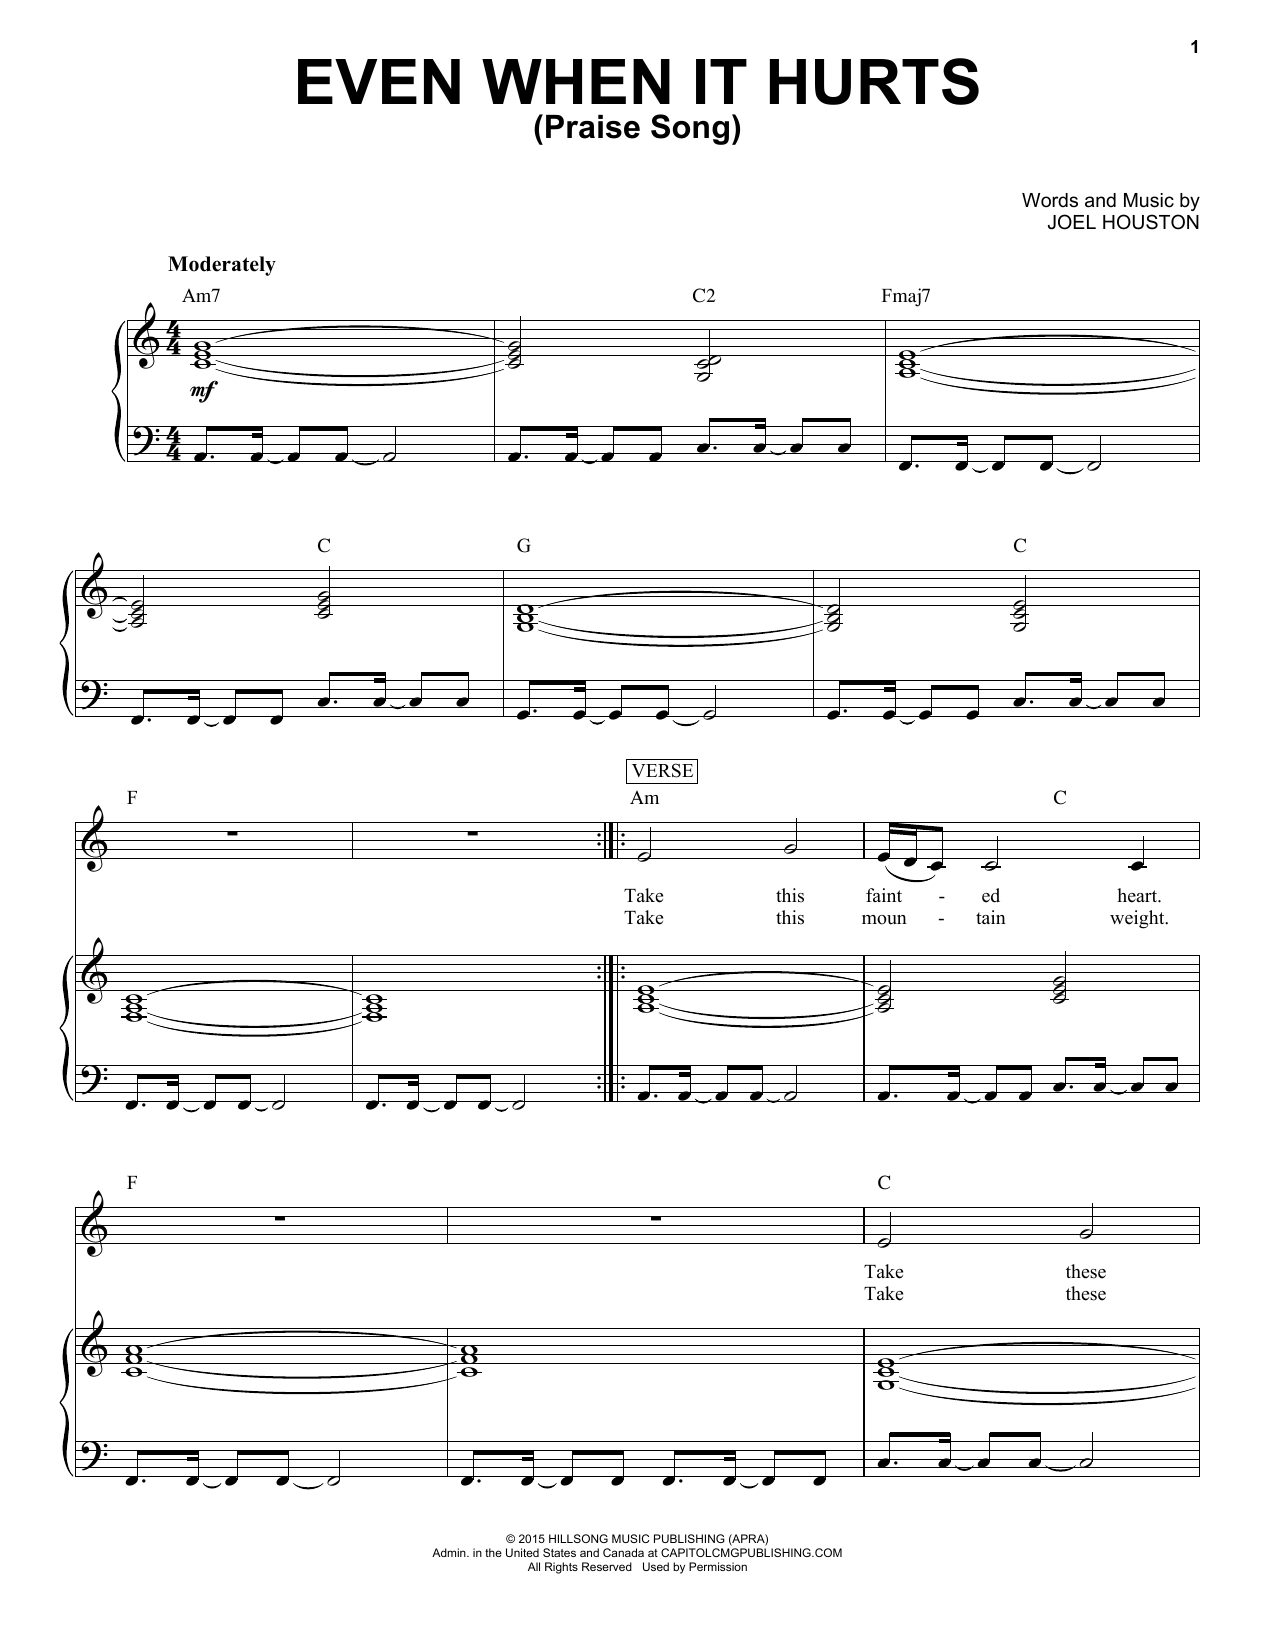 Download Hillsong United Even When It Hurts (Praise Song) Sheet Music